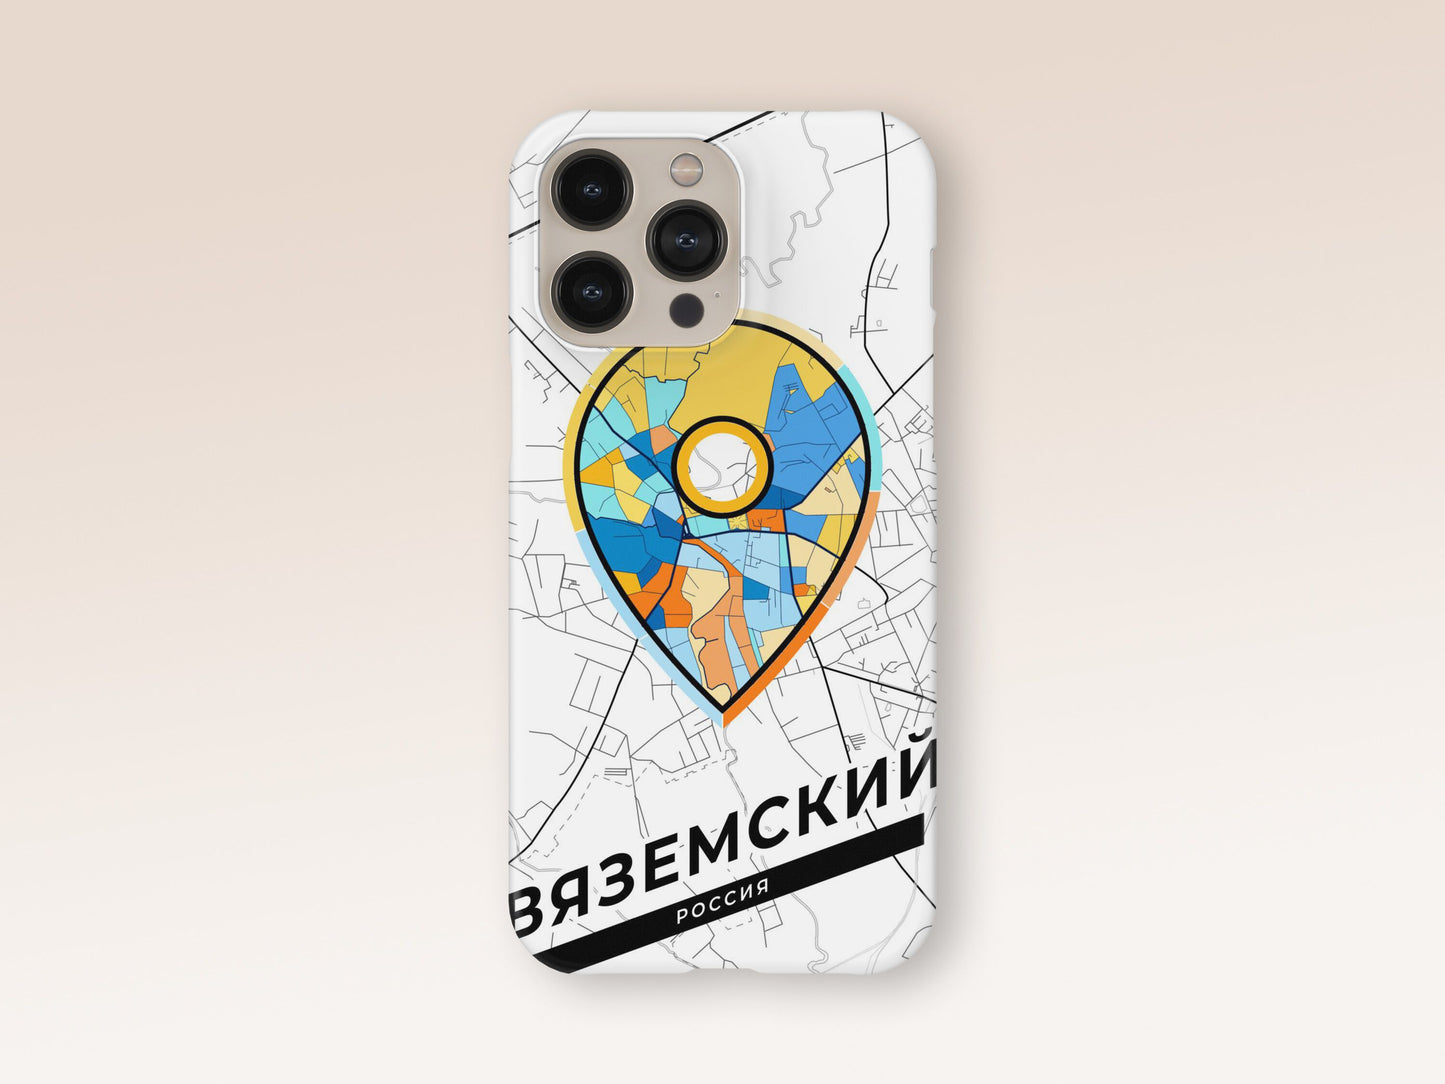 Vyazma Russia slim phone case with colorful icon 1